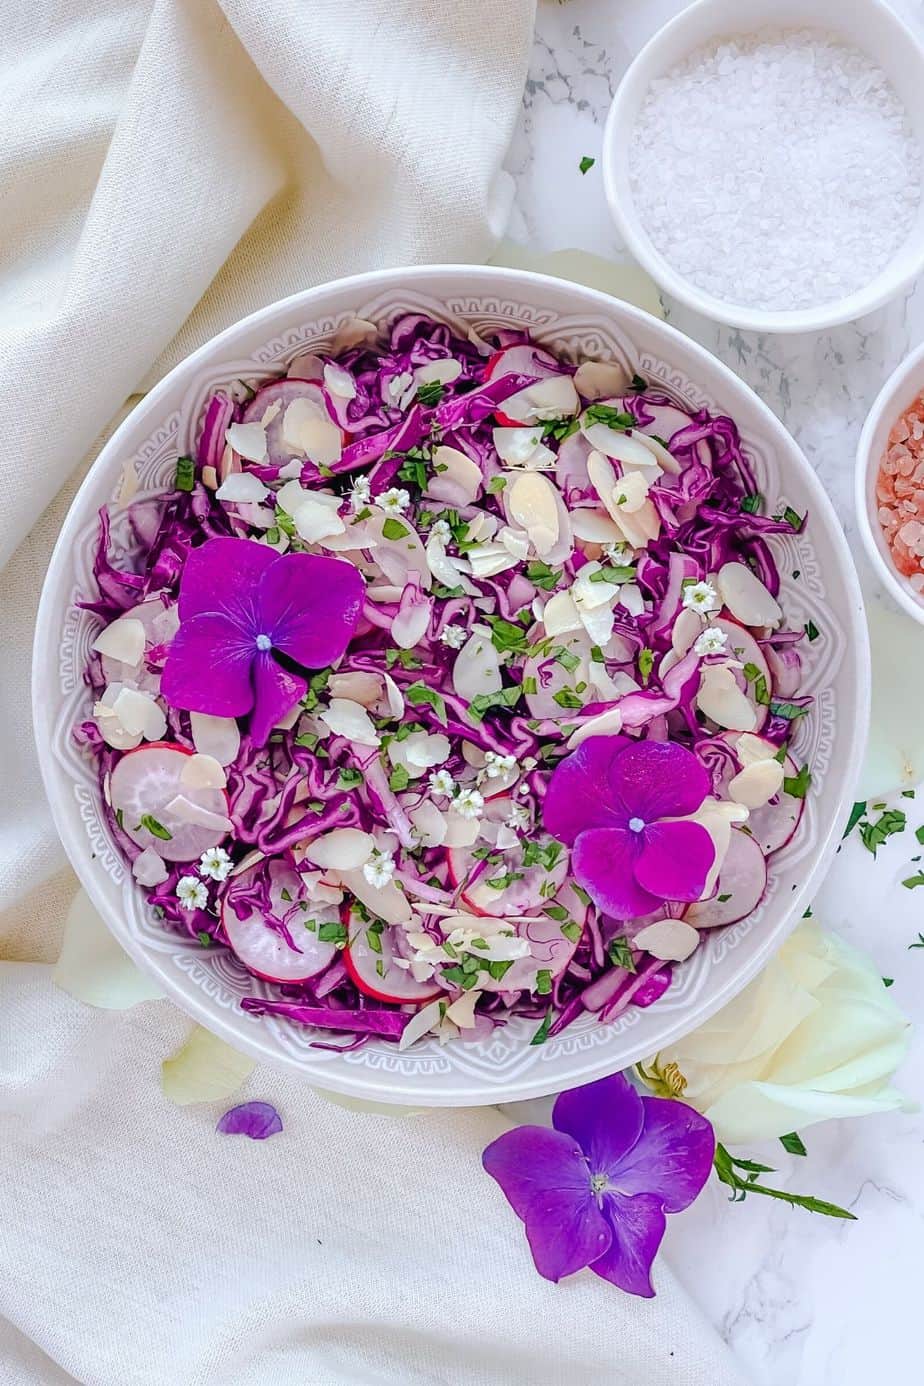 Healthy Purple Cabbage salad with Almonds - Crunchy, healthy, sweet and so easy to make. This salad recipe has only 4 main ingredients and is full of great fresh flavors thanks to delicious Maple Vinegar Salad Dressing.  - The Yummy Bowl